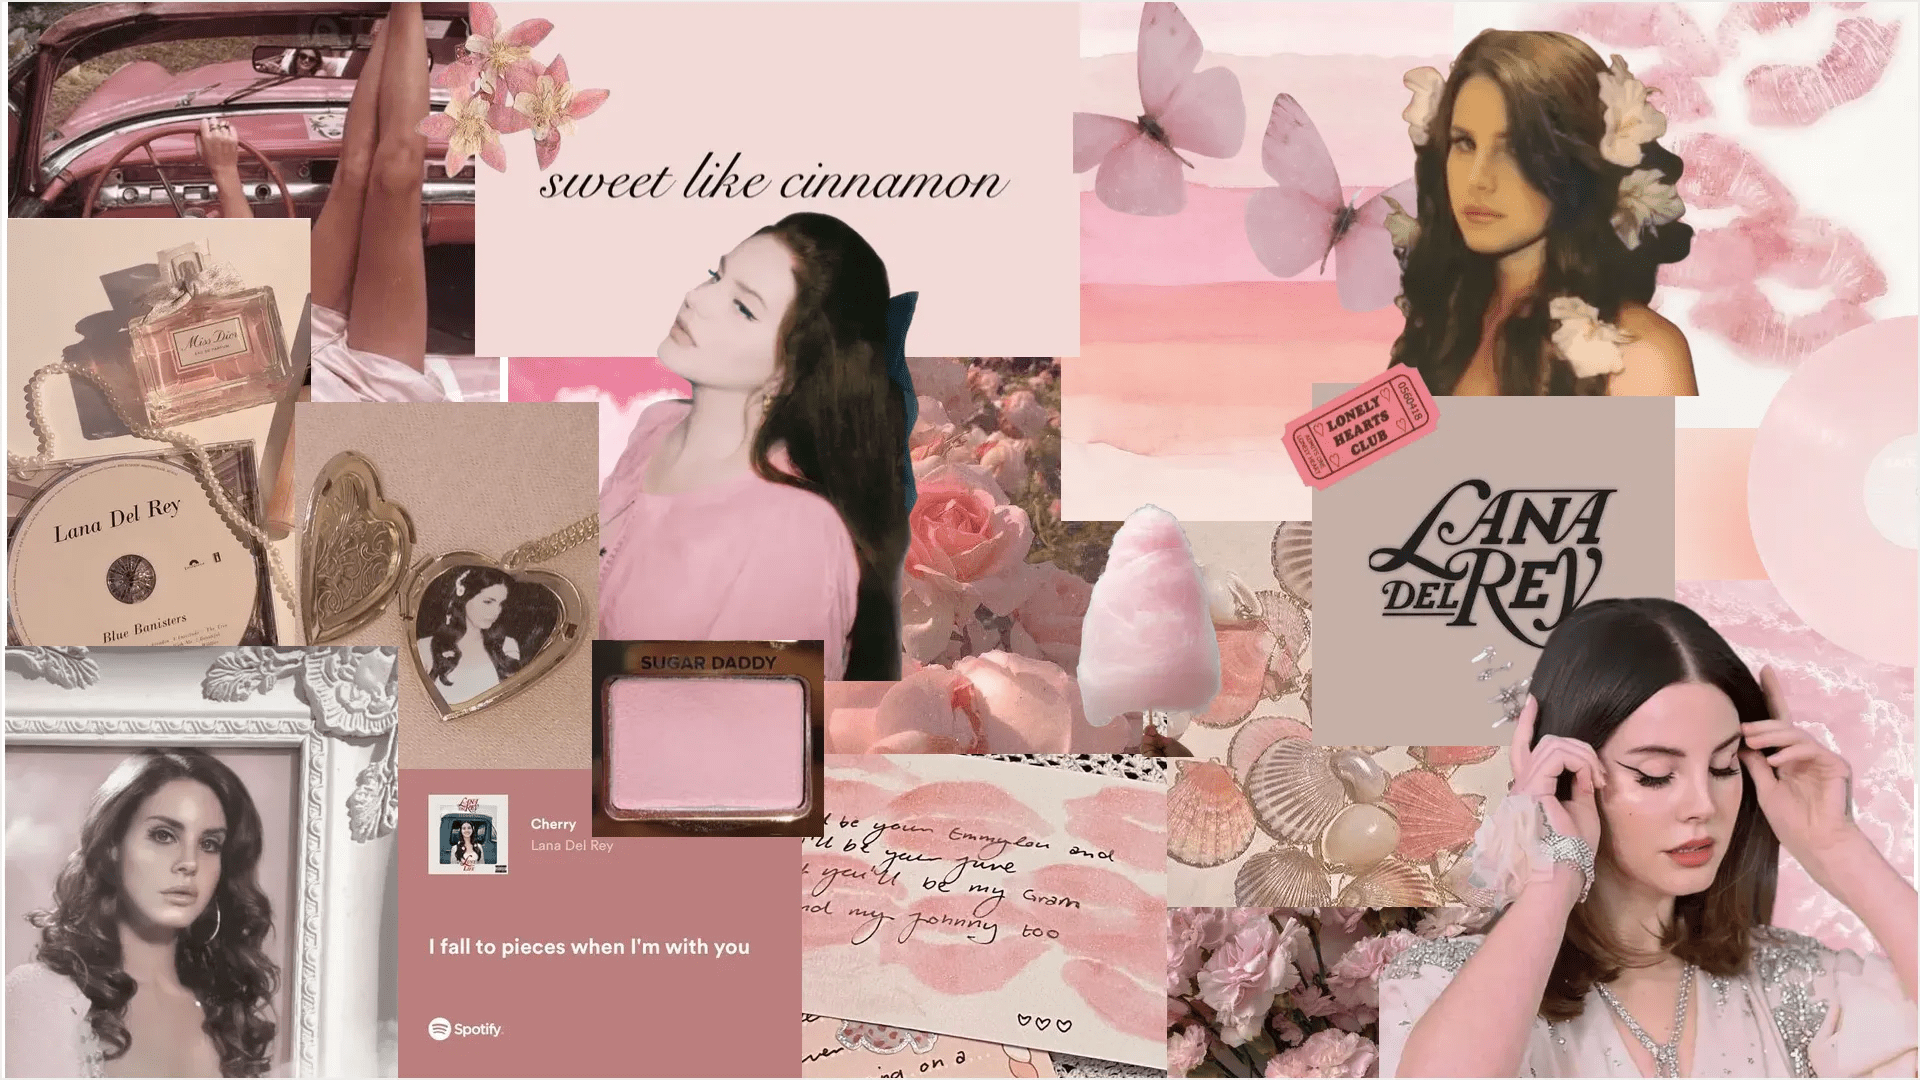 A collage of images of Lana Del Rey, butterflies, and other pink and brown images. - Lana Del Rey